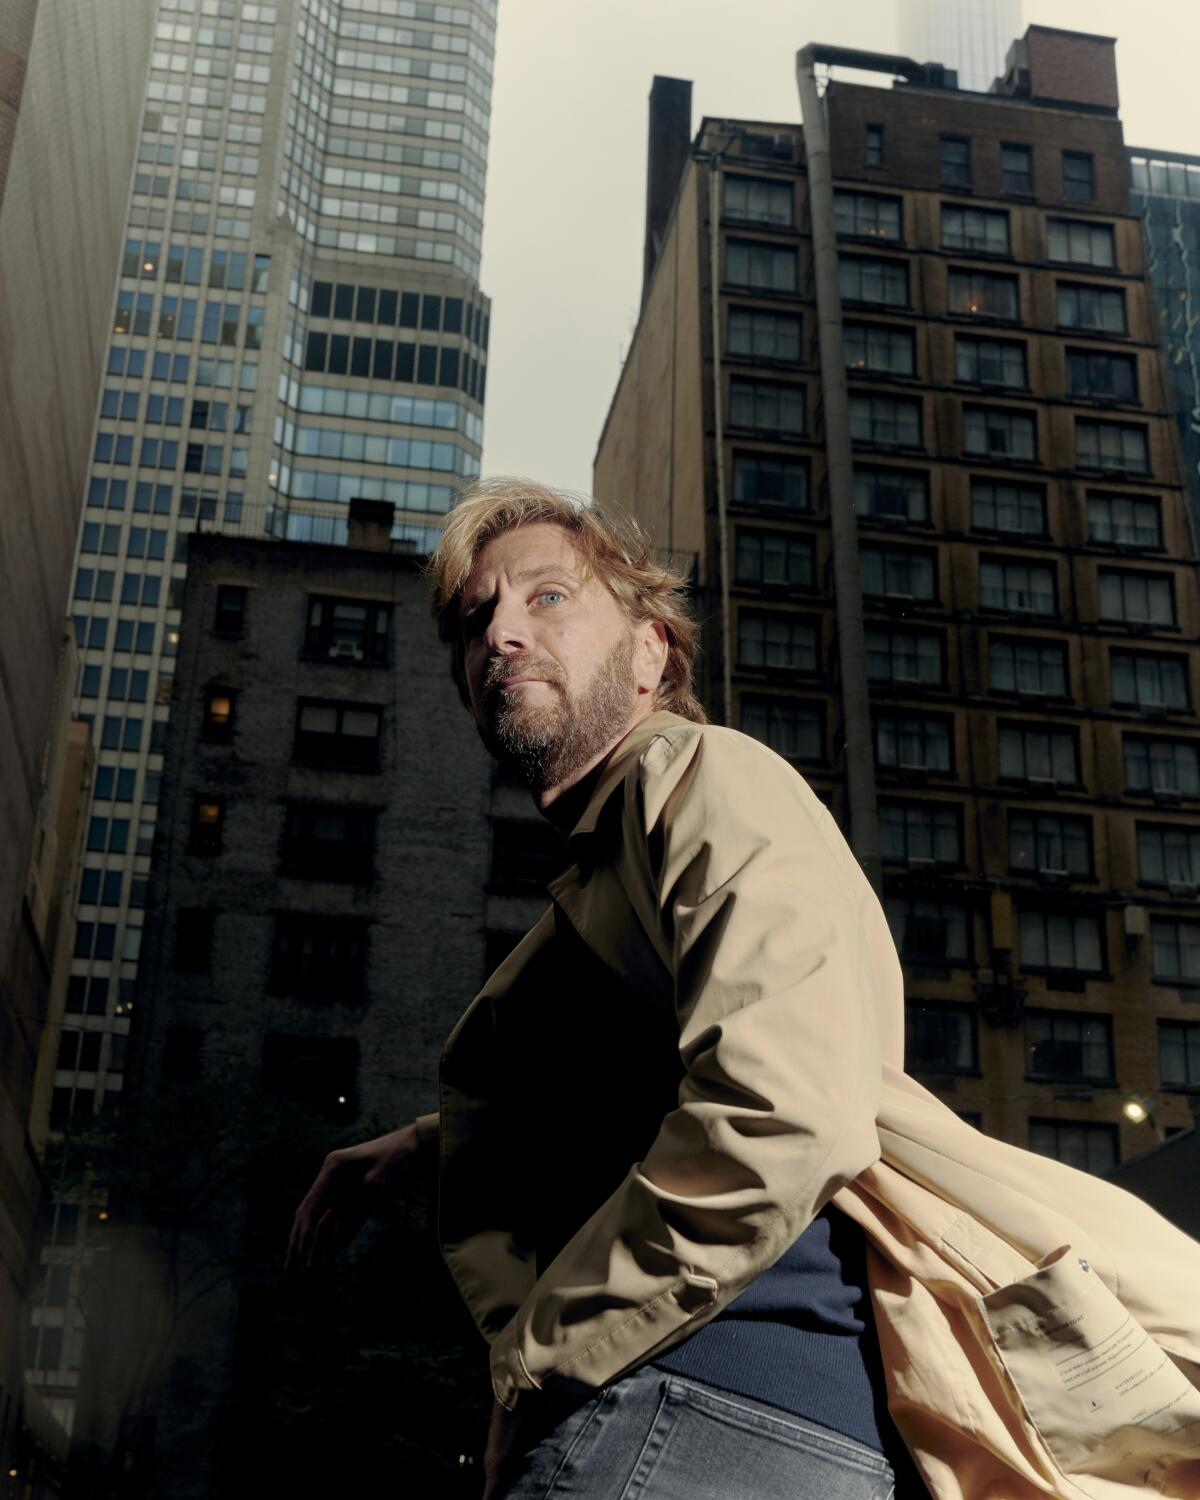 Director Ruben Ostlund stands on a balcony with New York City buildings in the background